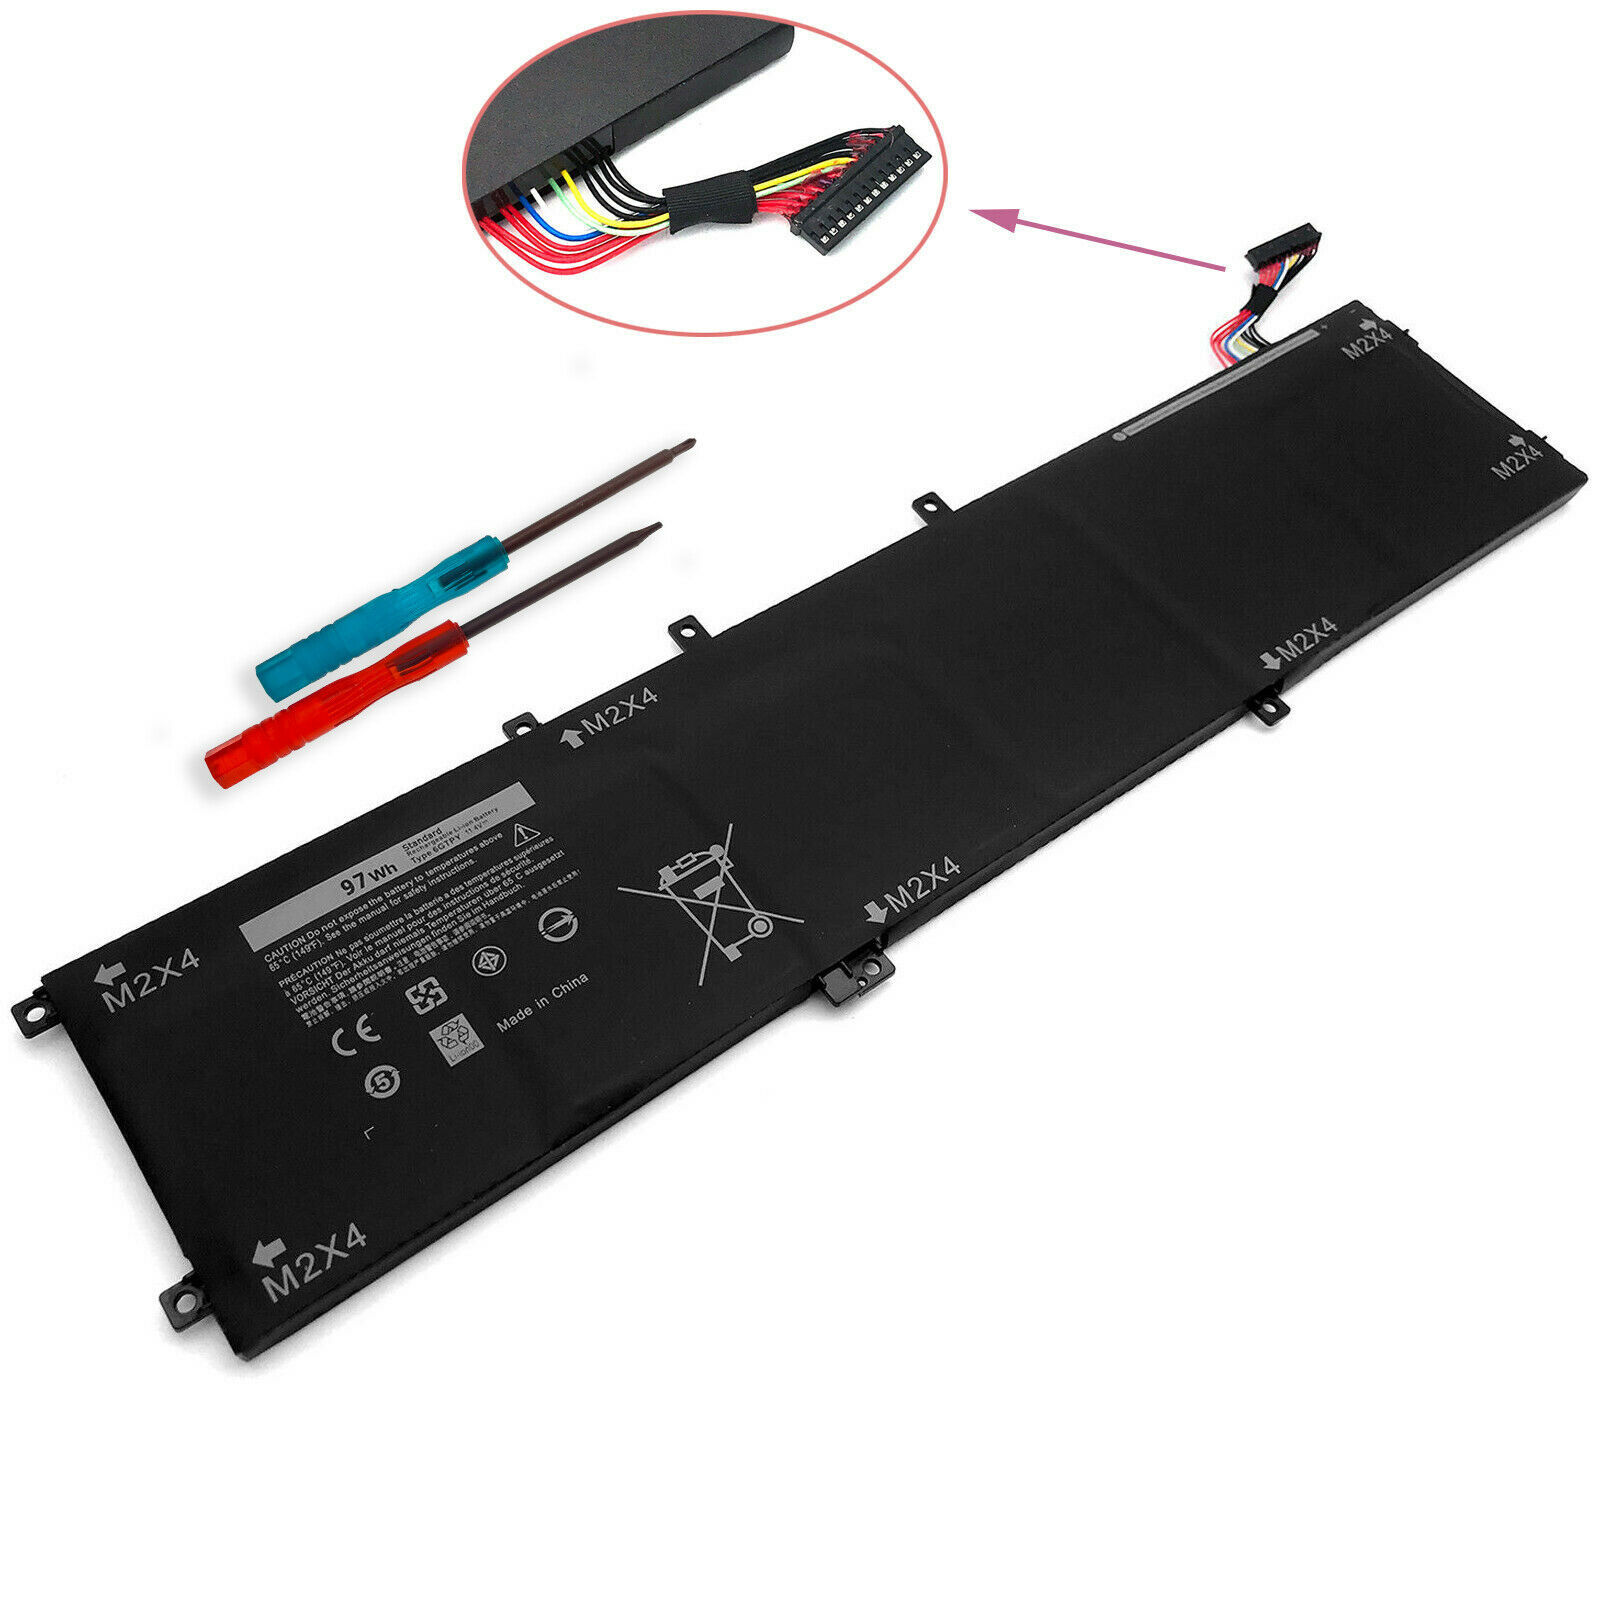 New 6-Cell 97Wh Extended Battery For Dell Xps 15 9560 9570 Laptop Gpm03 6Gtpy